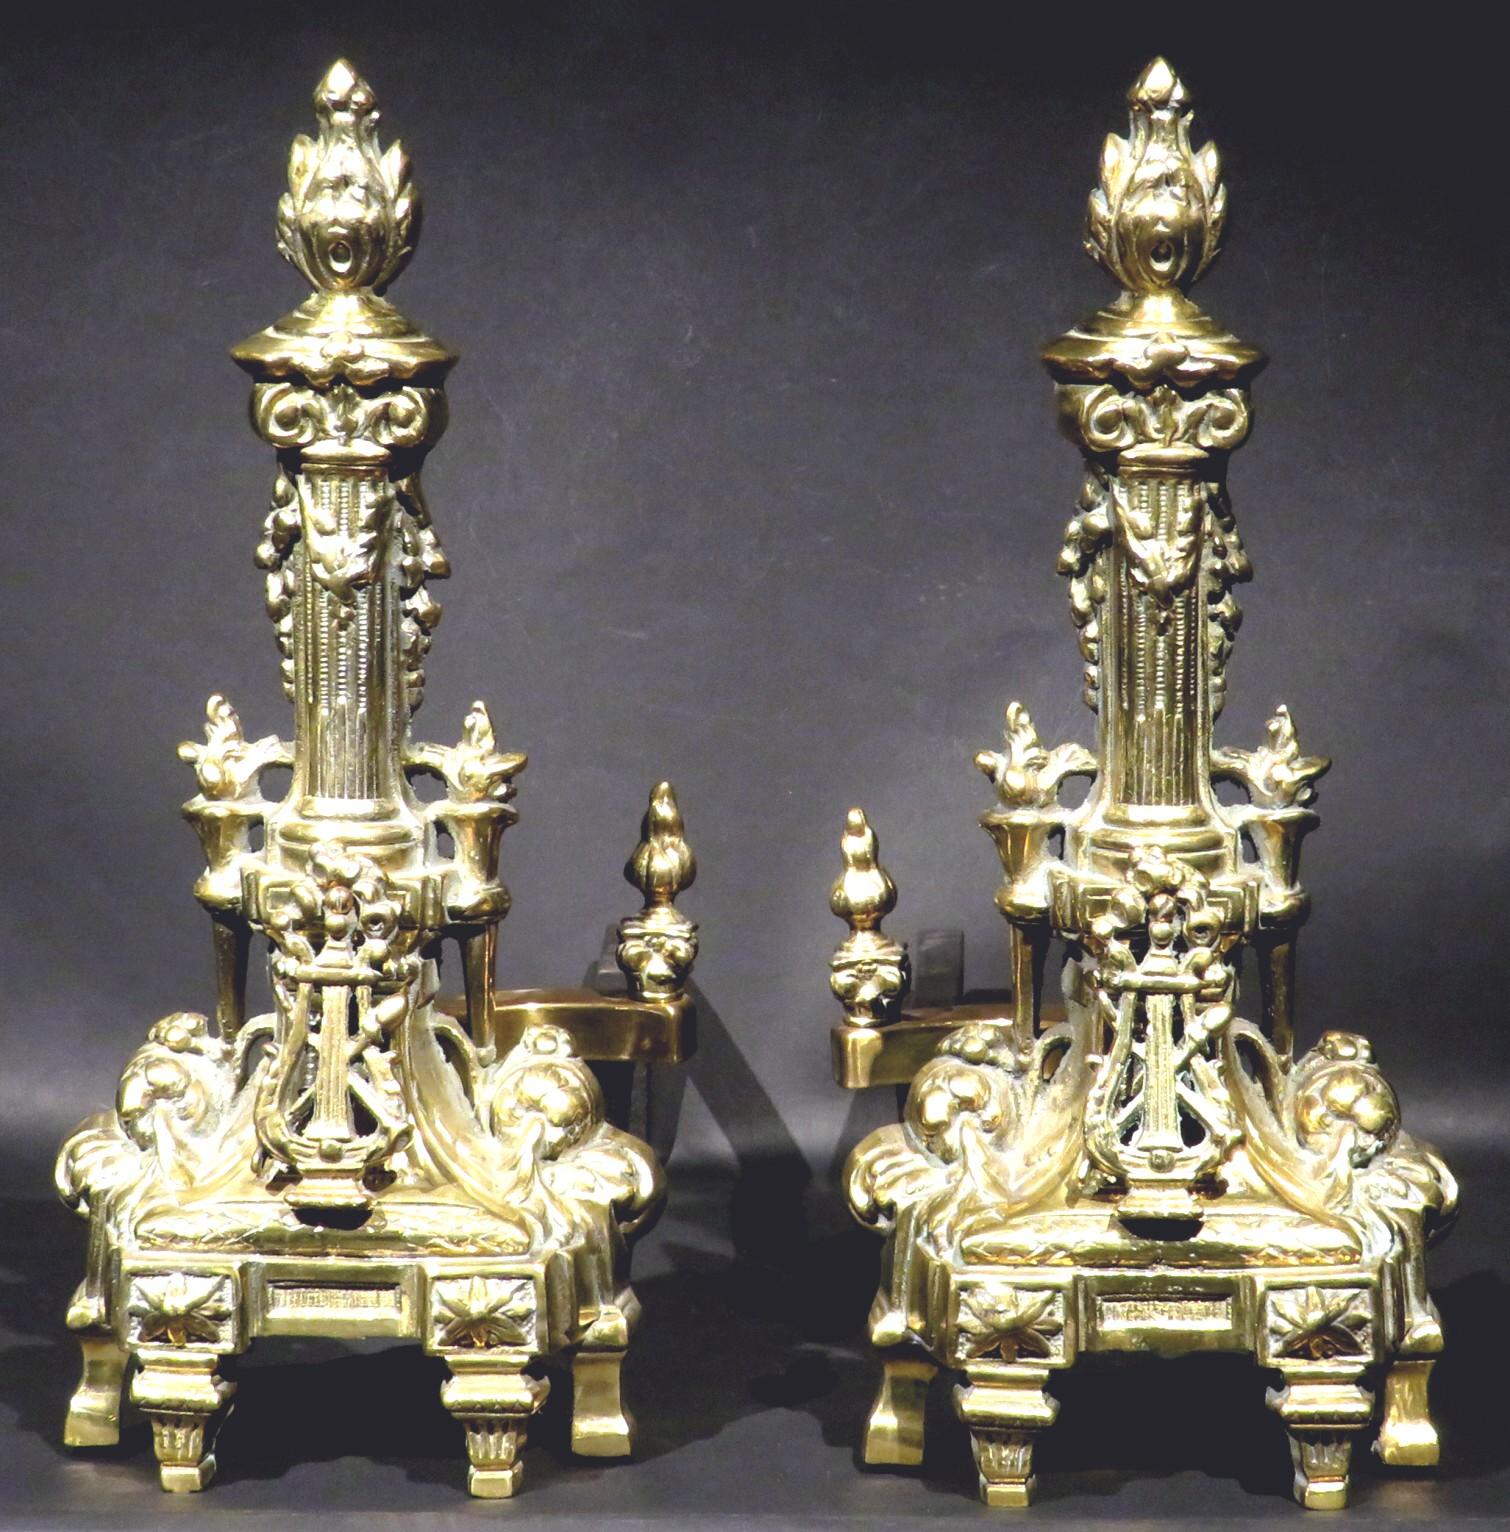 A large and impressive pair of Louis XVI style gilt bronze chenets showing applied lyre shaped elements fronting torchere shaped columns with flame shaped finials.